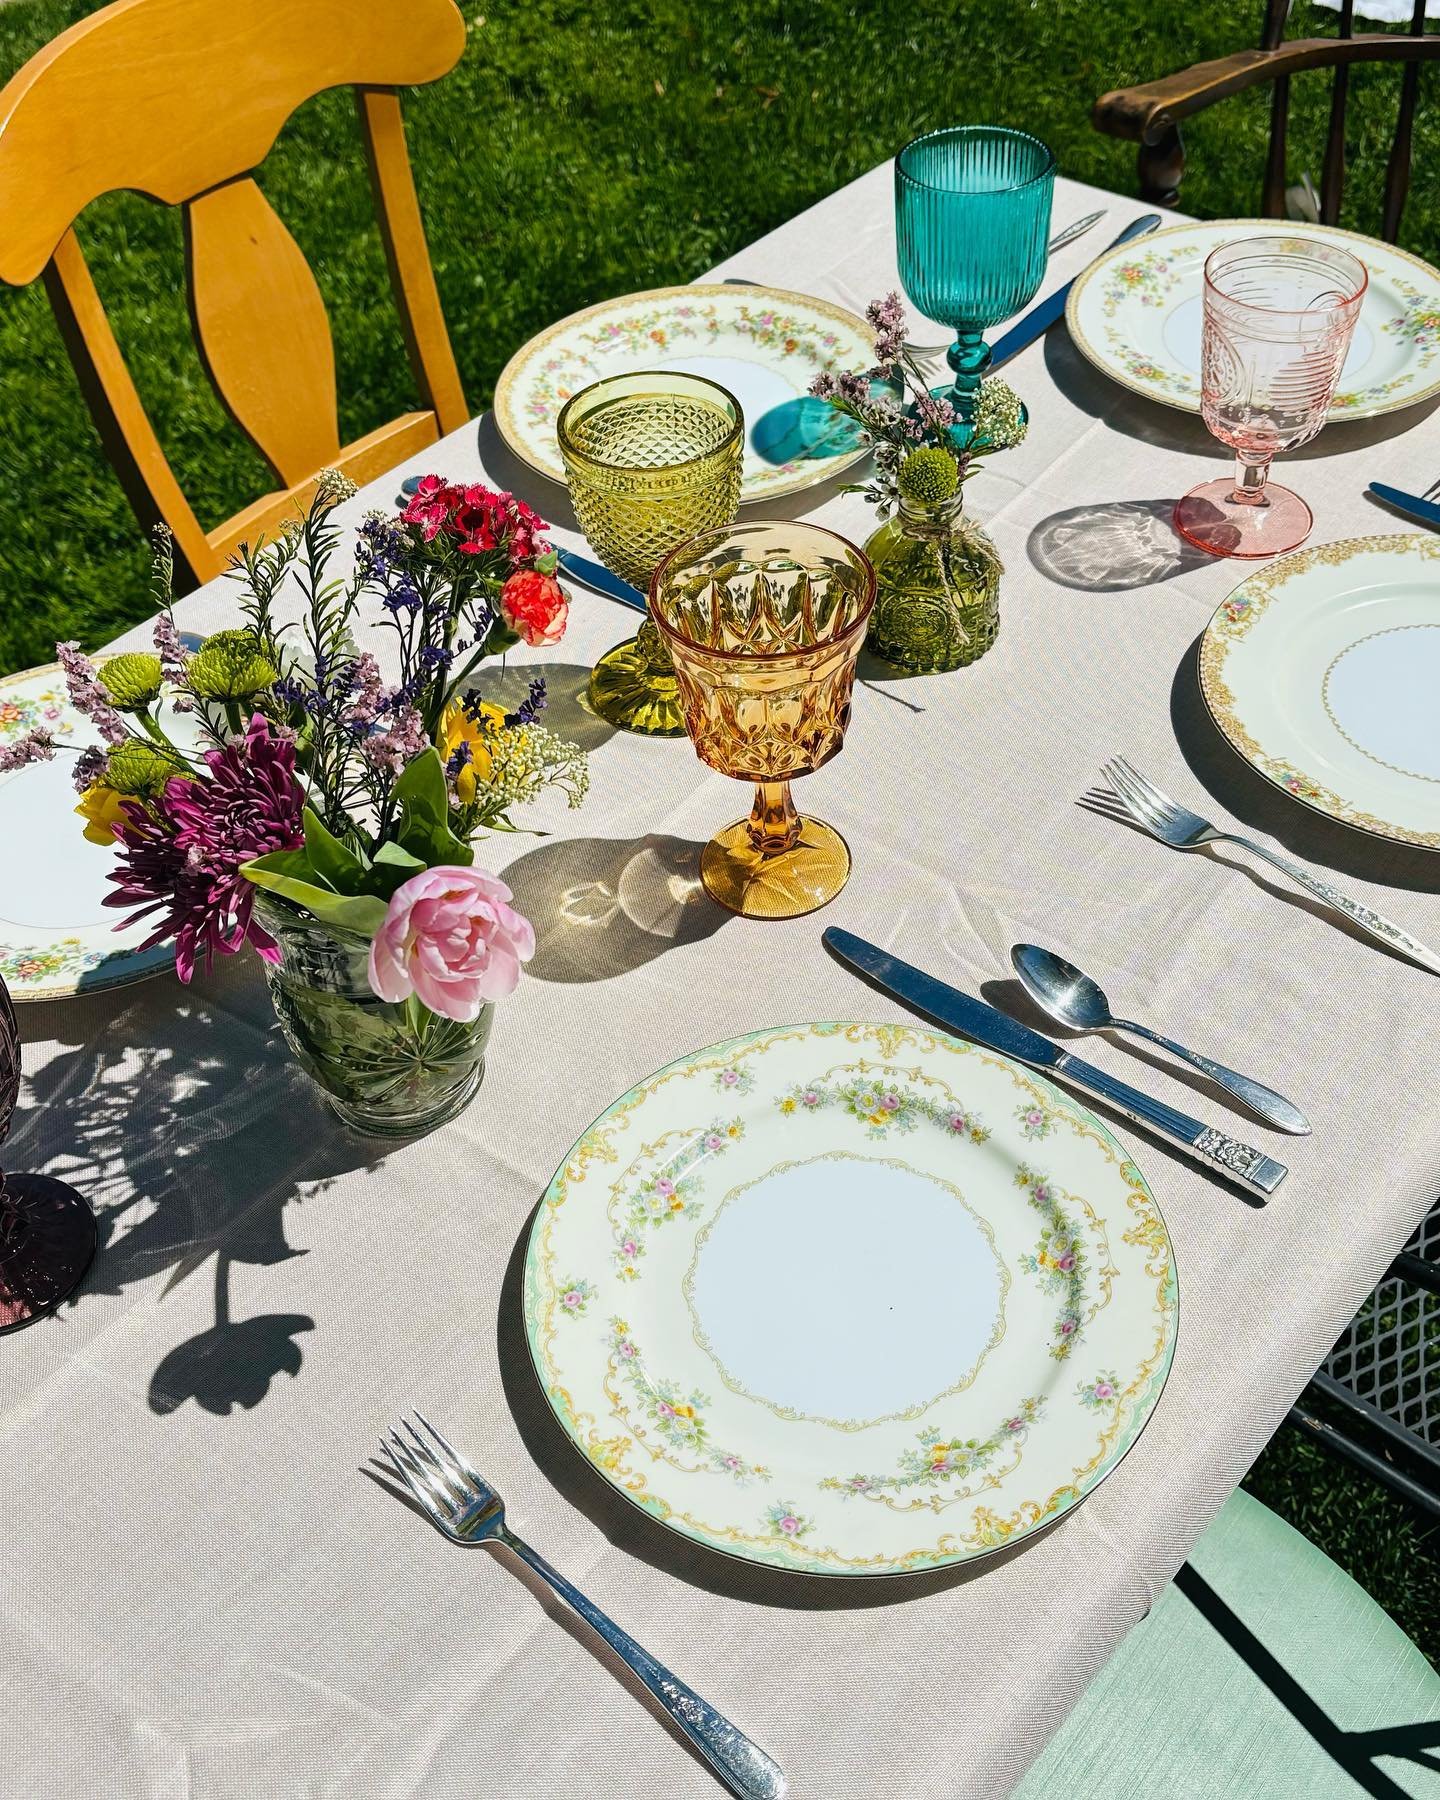 Today we were delighted to host a beautiful Mother&rsquo;s Day Garden  Party featuring colorful goblets and Noritake China in mismatched yet similar patterns. We have the best moms and aunts around and were so glad to spend the day making them feel e